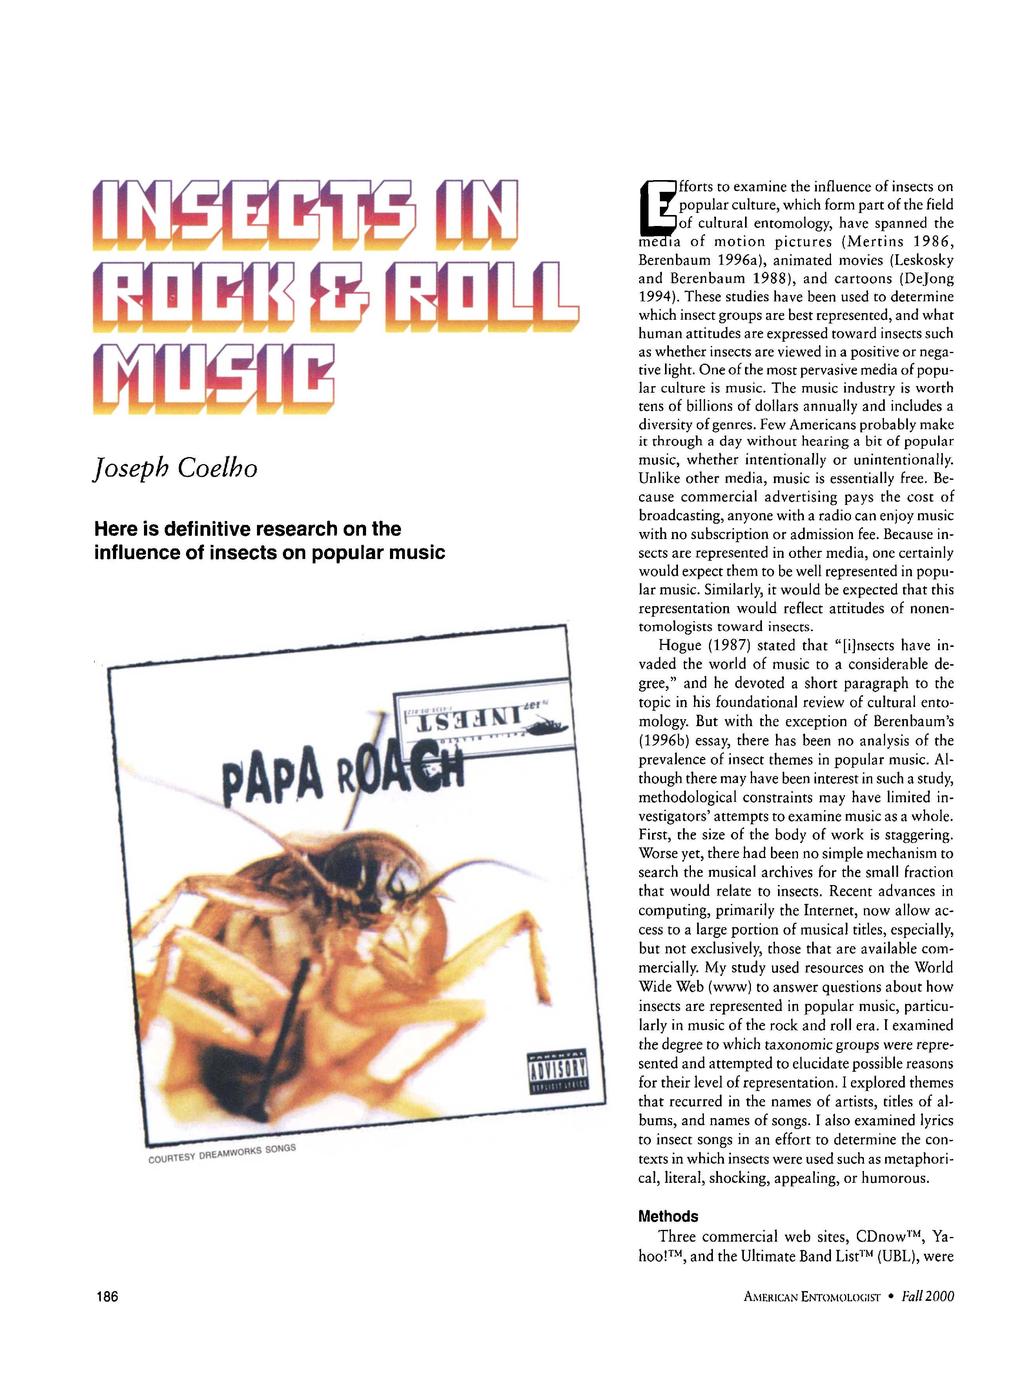 Joseph Coelho Here is definitive research on the influence of insects on popular music COURTESY OREI\MWORKS SONGS fforts to examine the influence of insects on popular culture, which form part of the